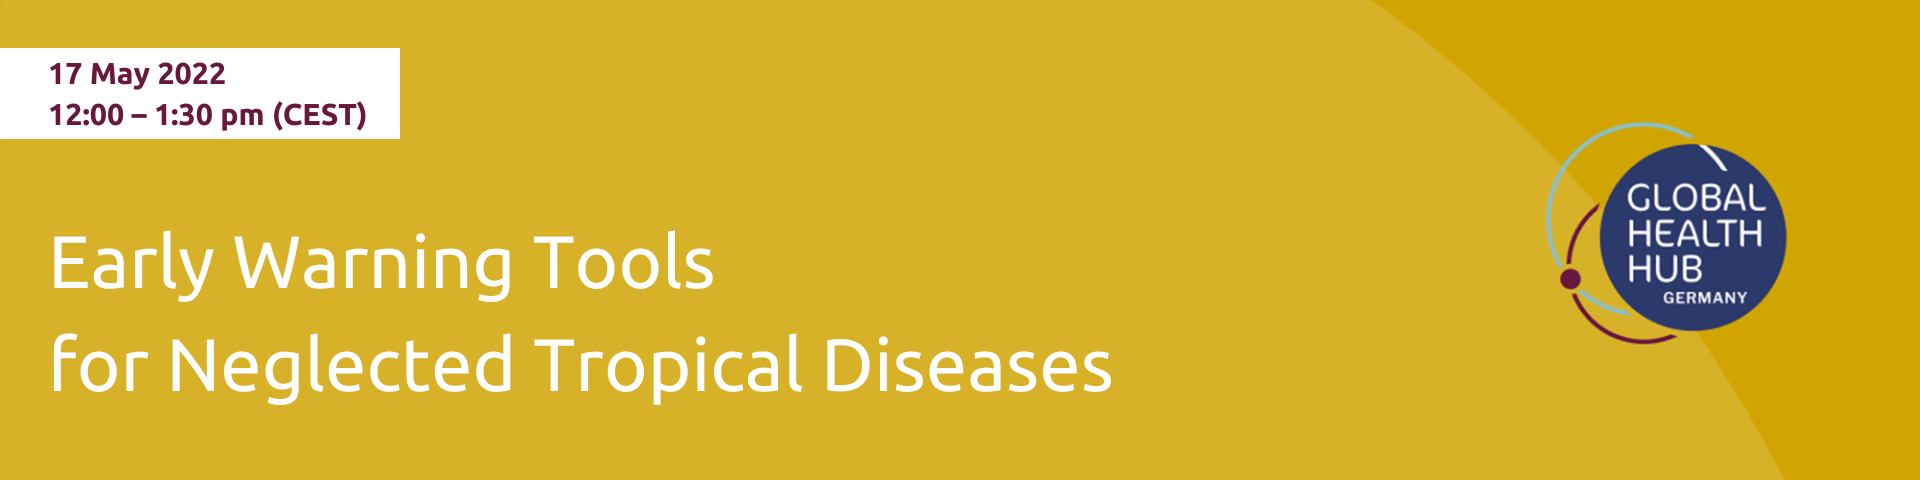 05/2022 Early Warning Tools for Neglected Tropical Diseases